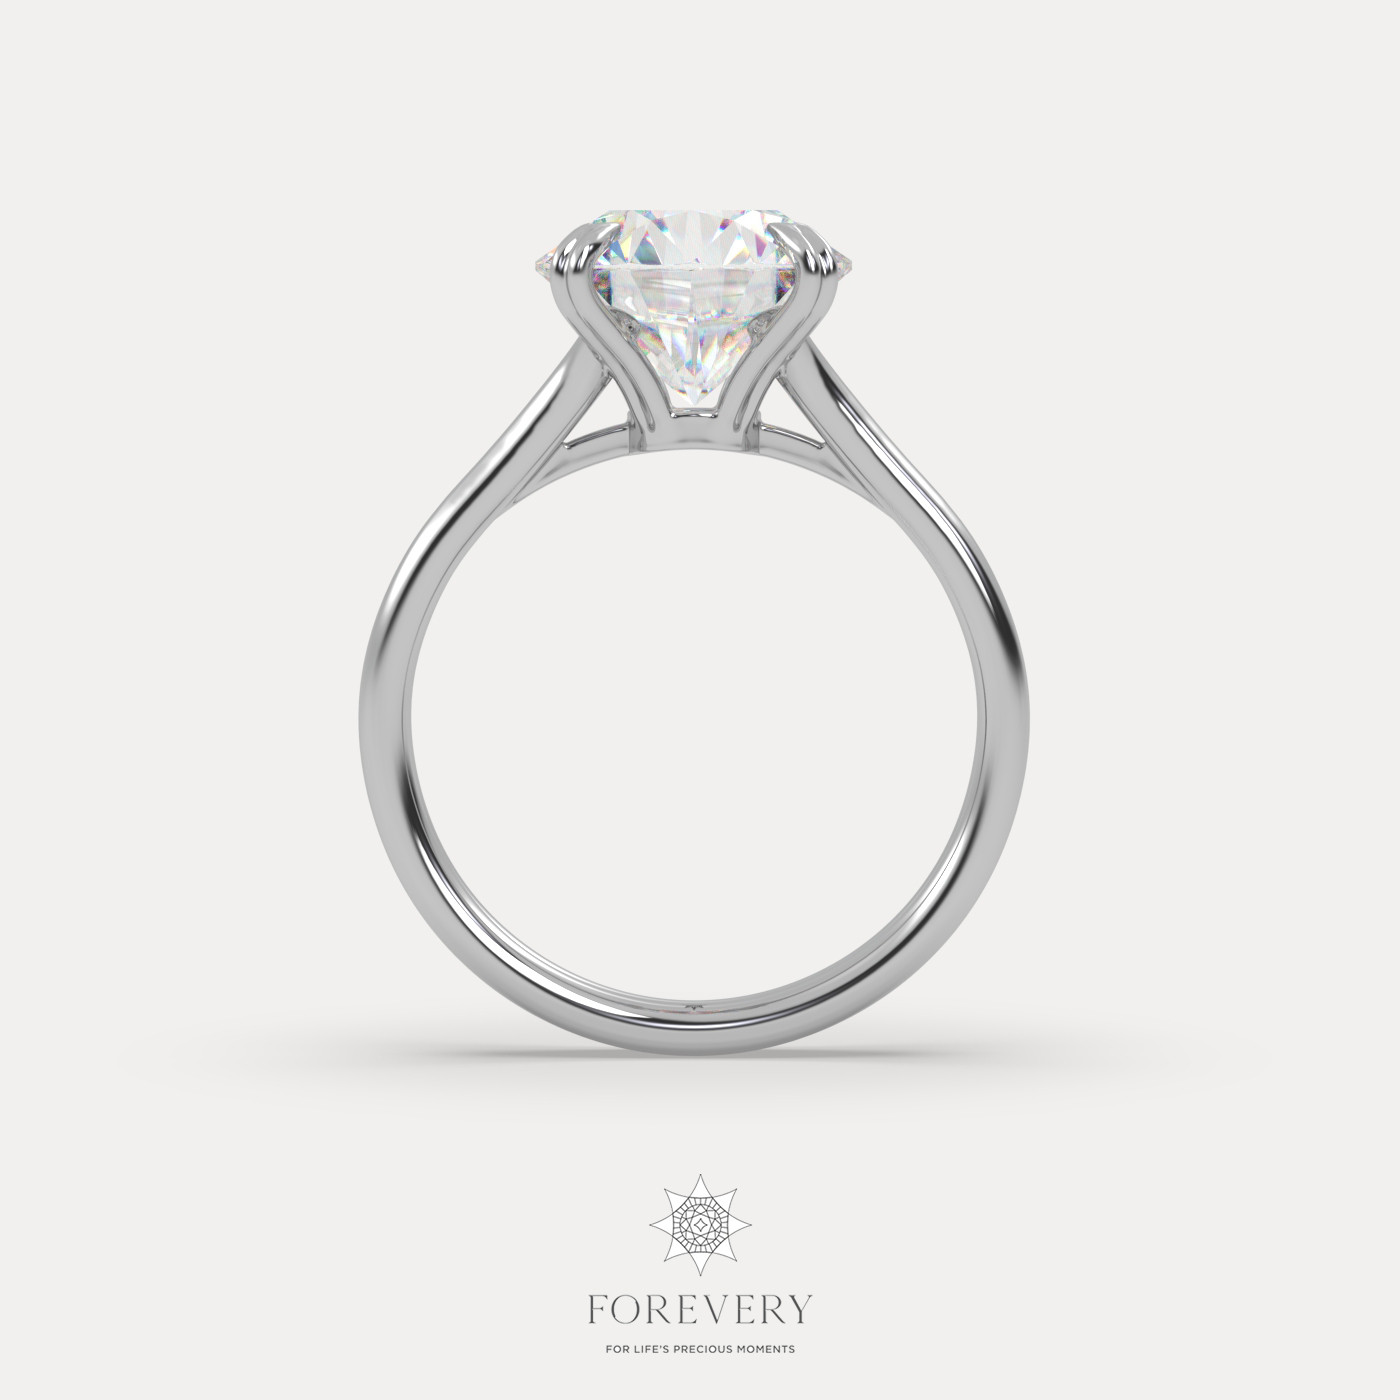 18K WHITE GOLD Round Cut Diamond Solitaire Engagament Ring